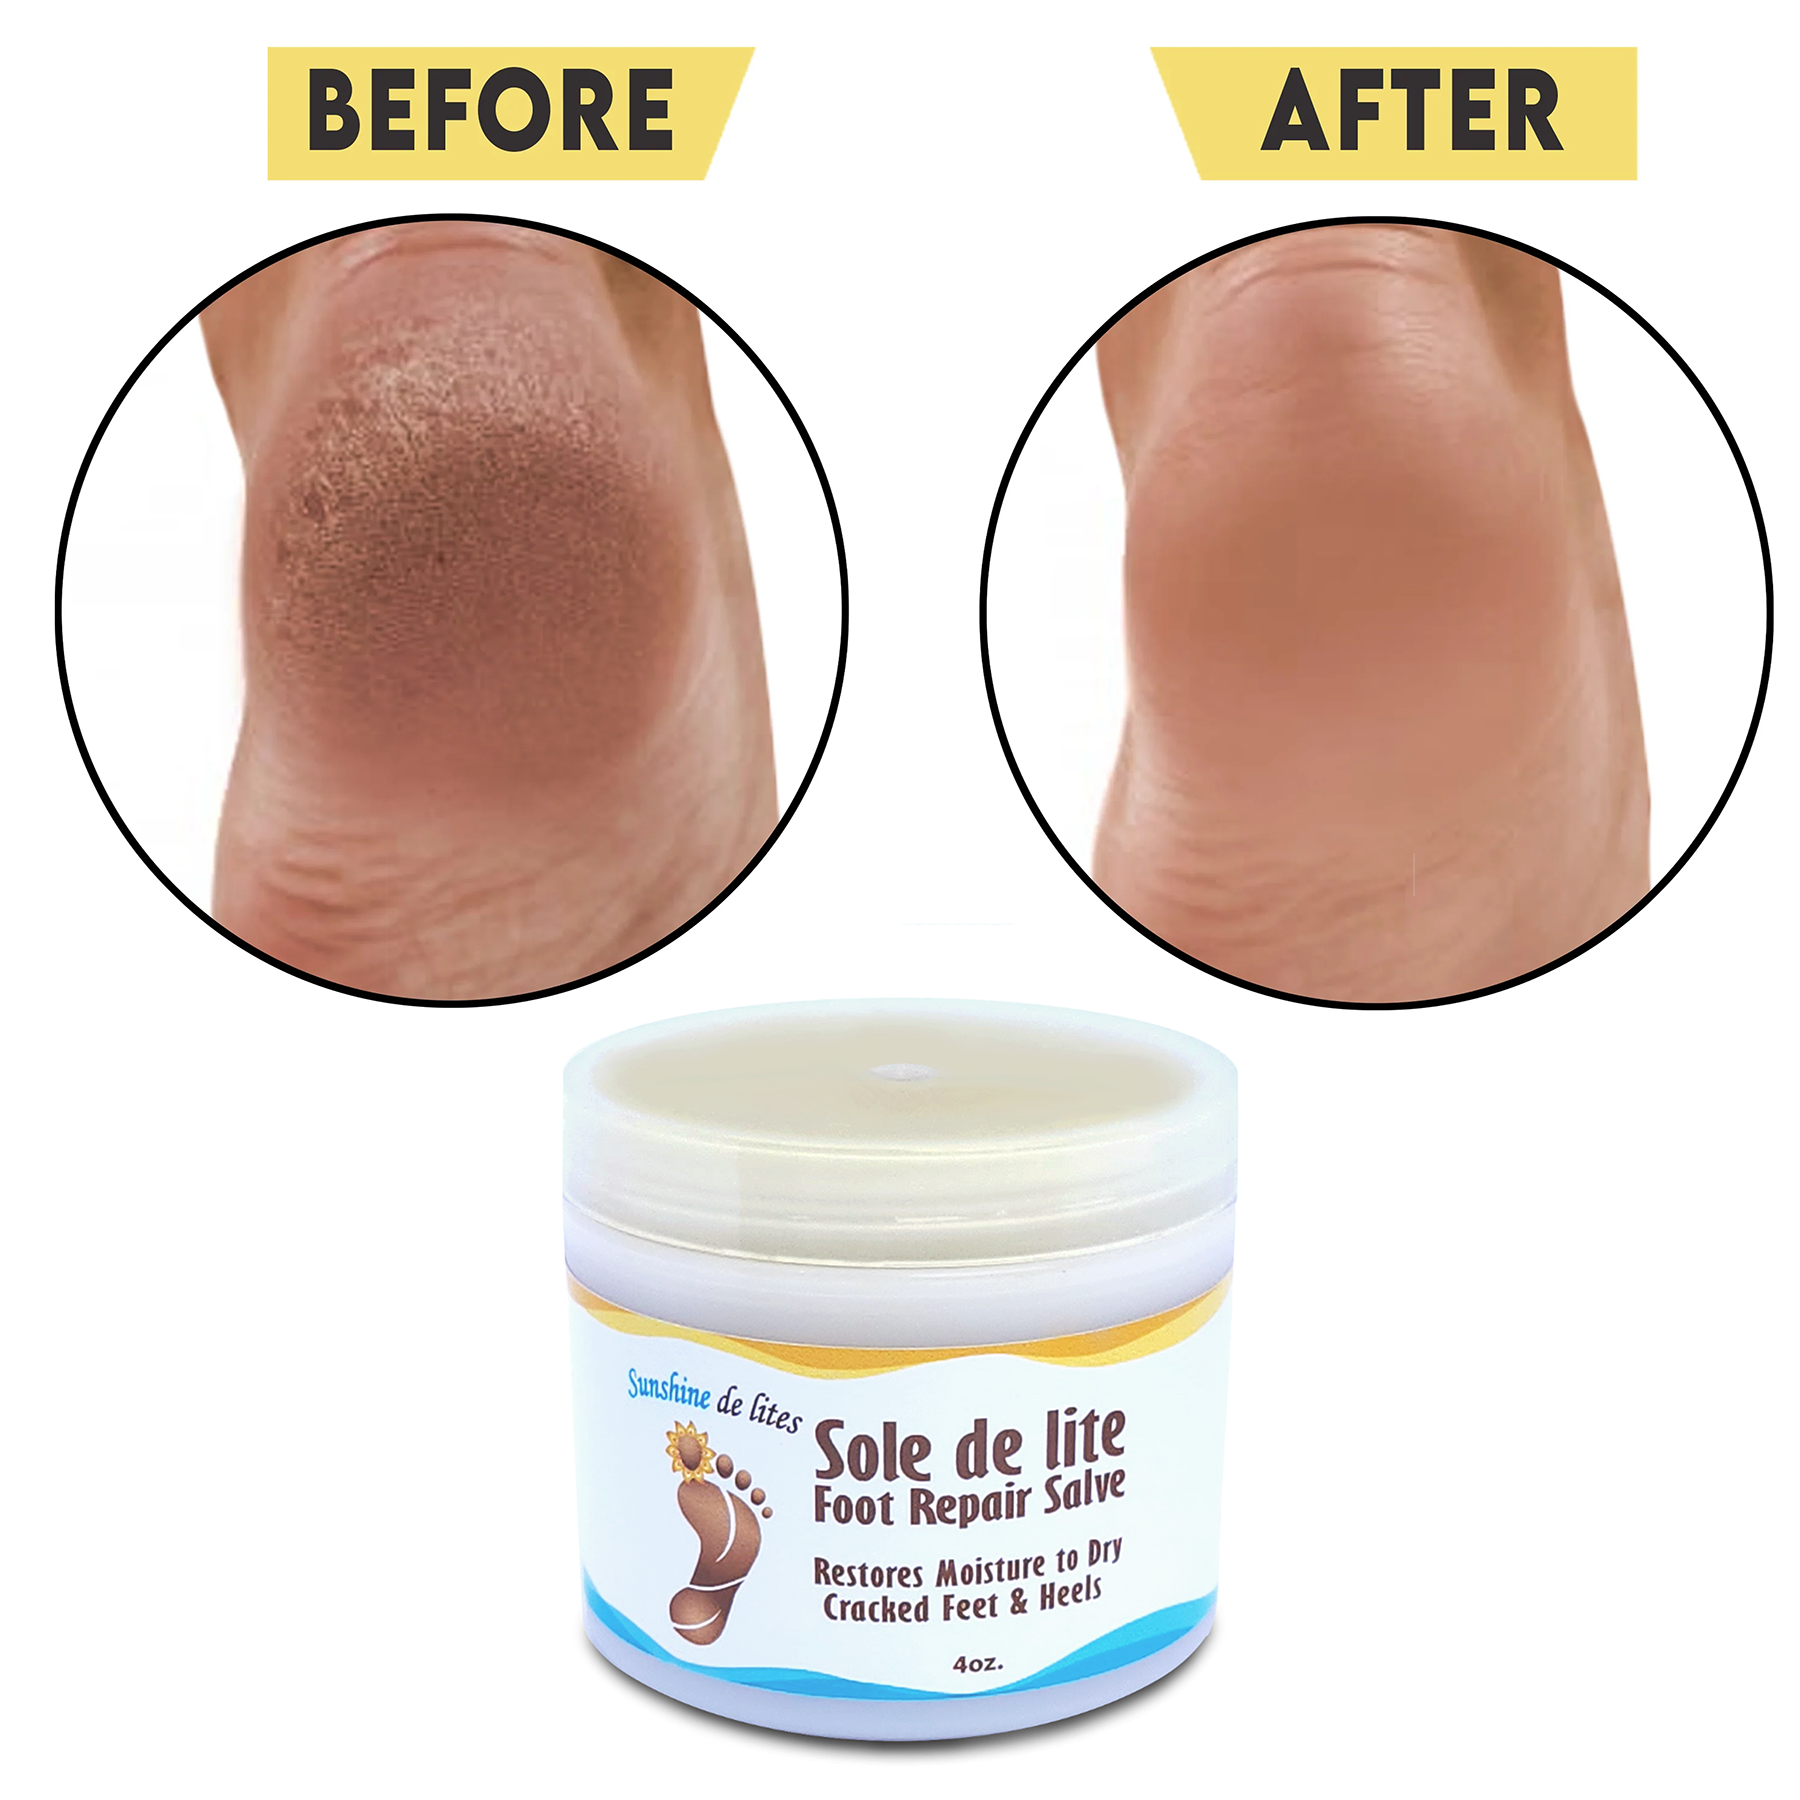 dry cracked rough feet before and smooth soft after feet cream treatment